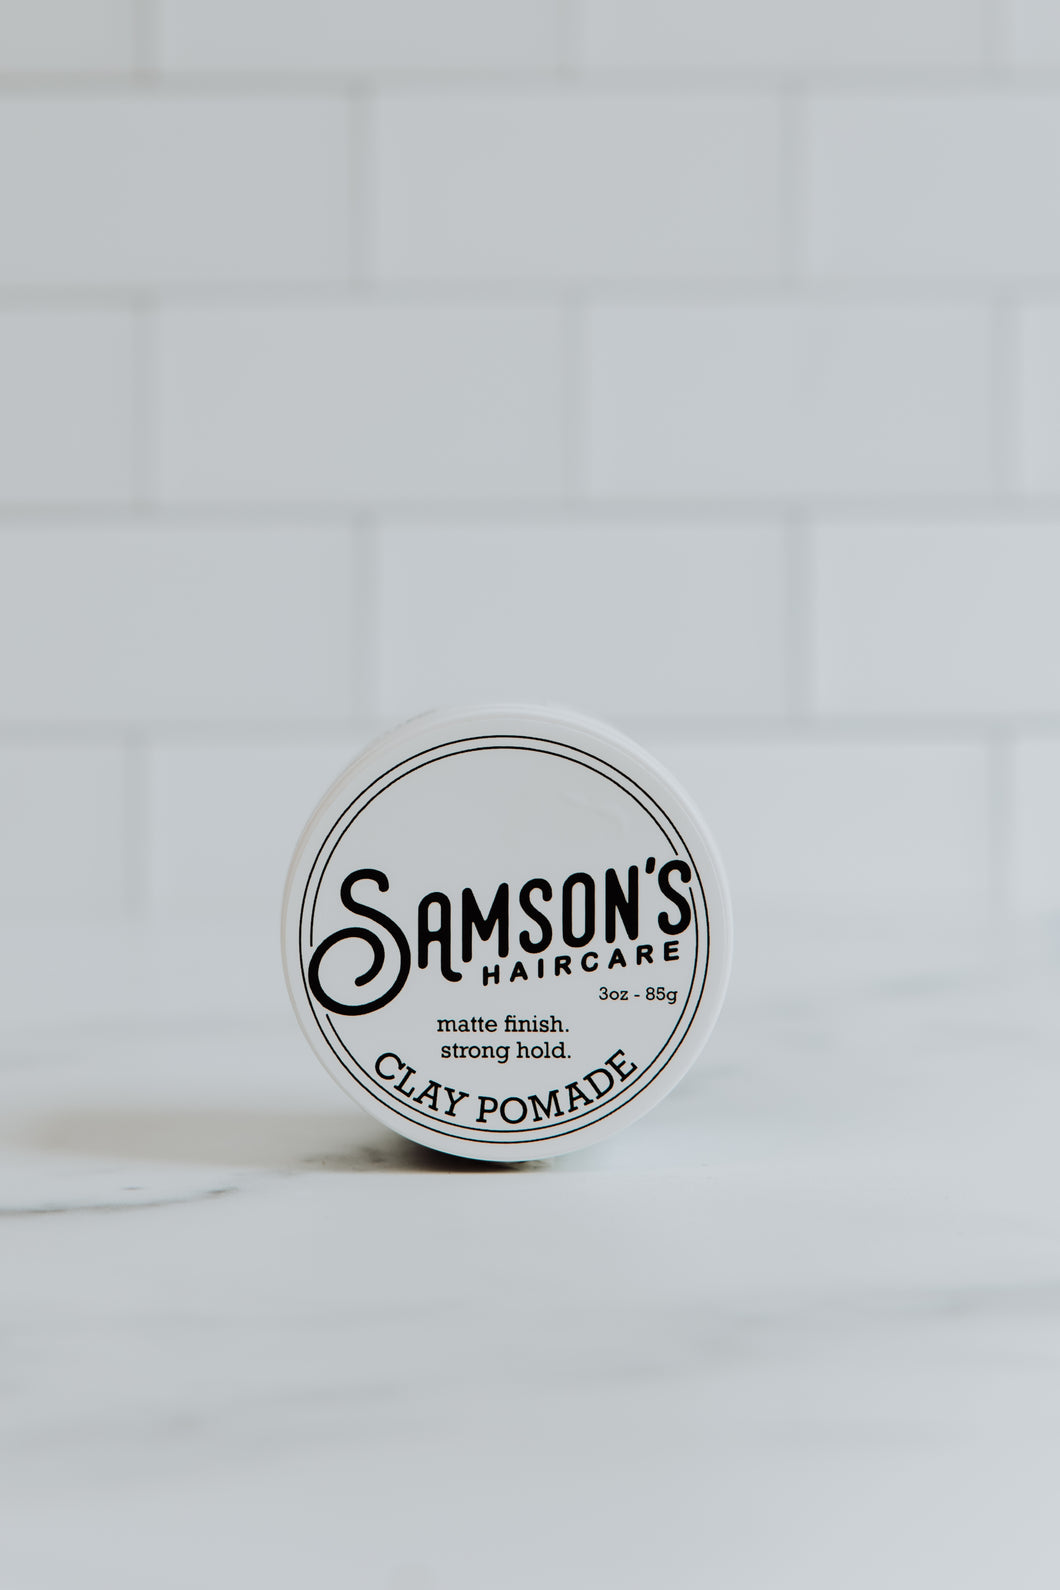 3 oz Matte Finish Clay Pomade container lying on its side, showcasing the top lid.